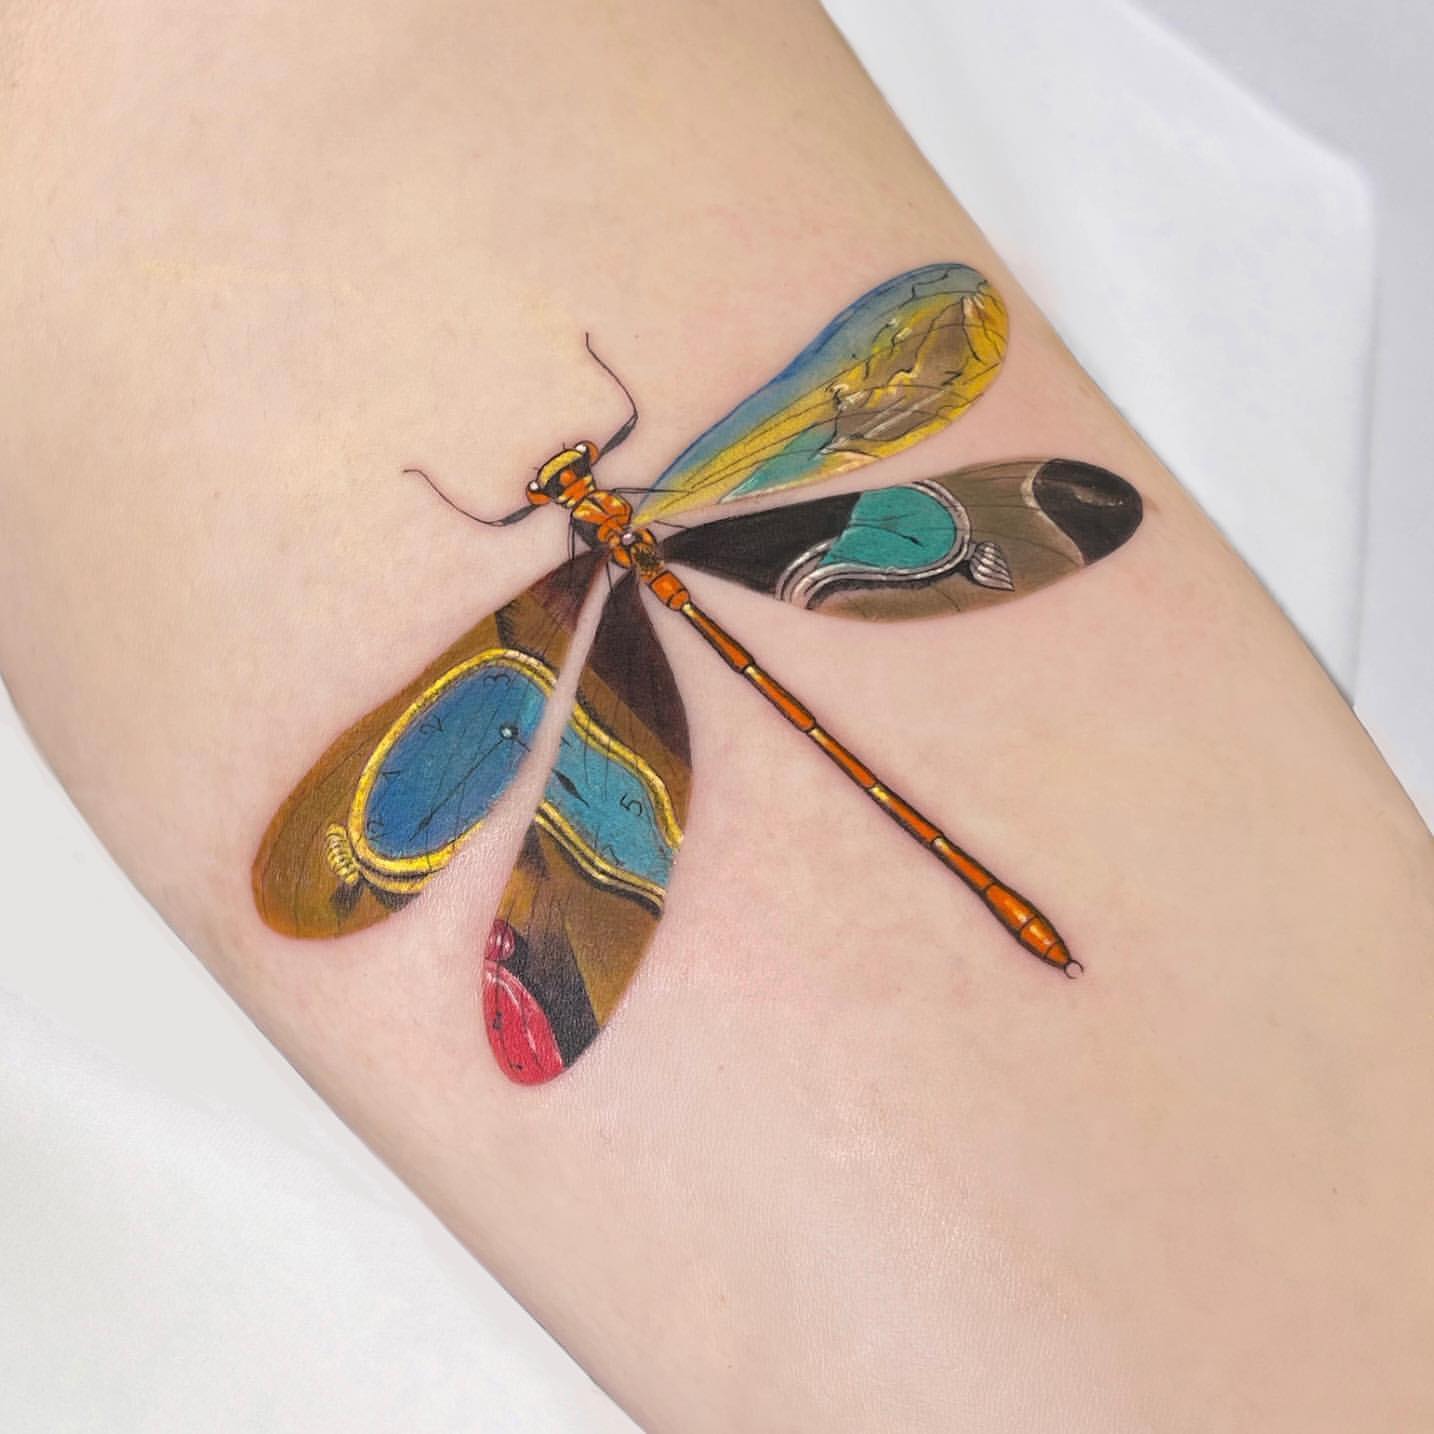 Best Insect Tattoo Ideas 20